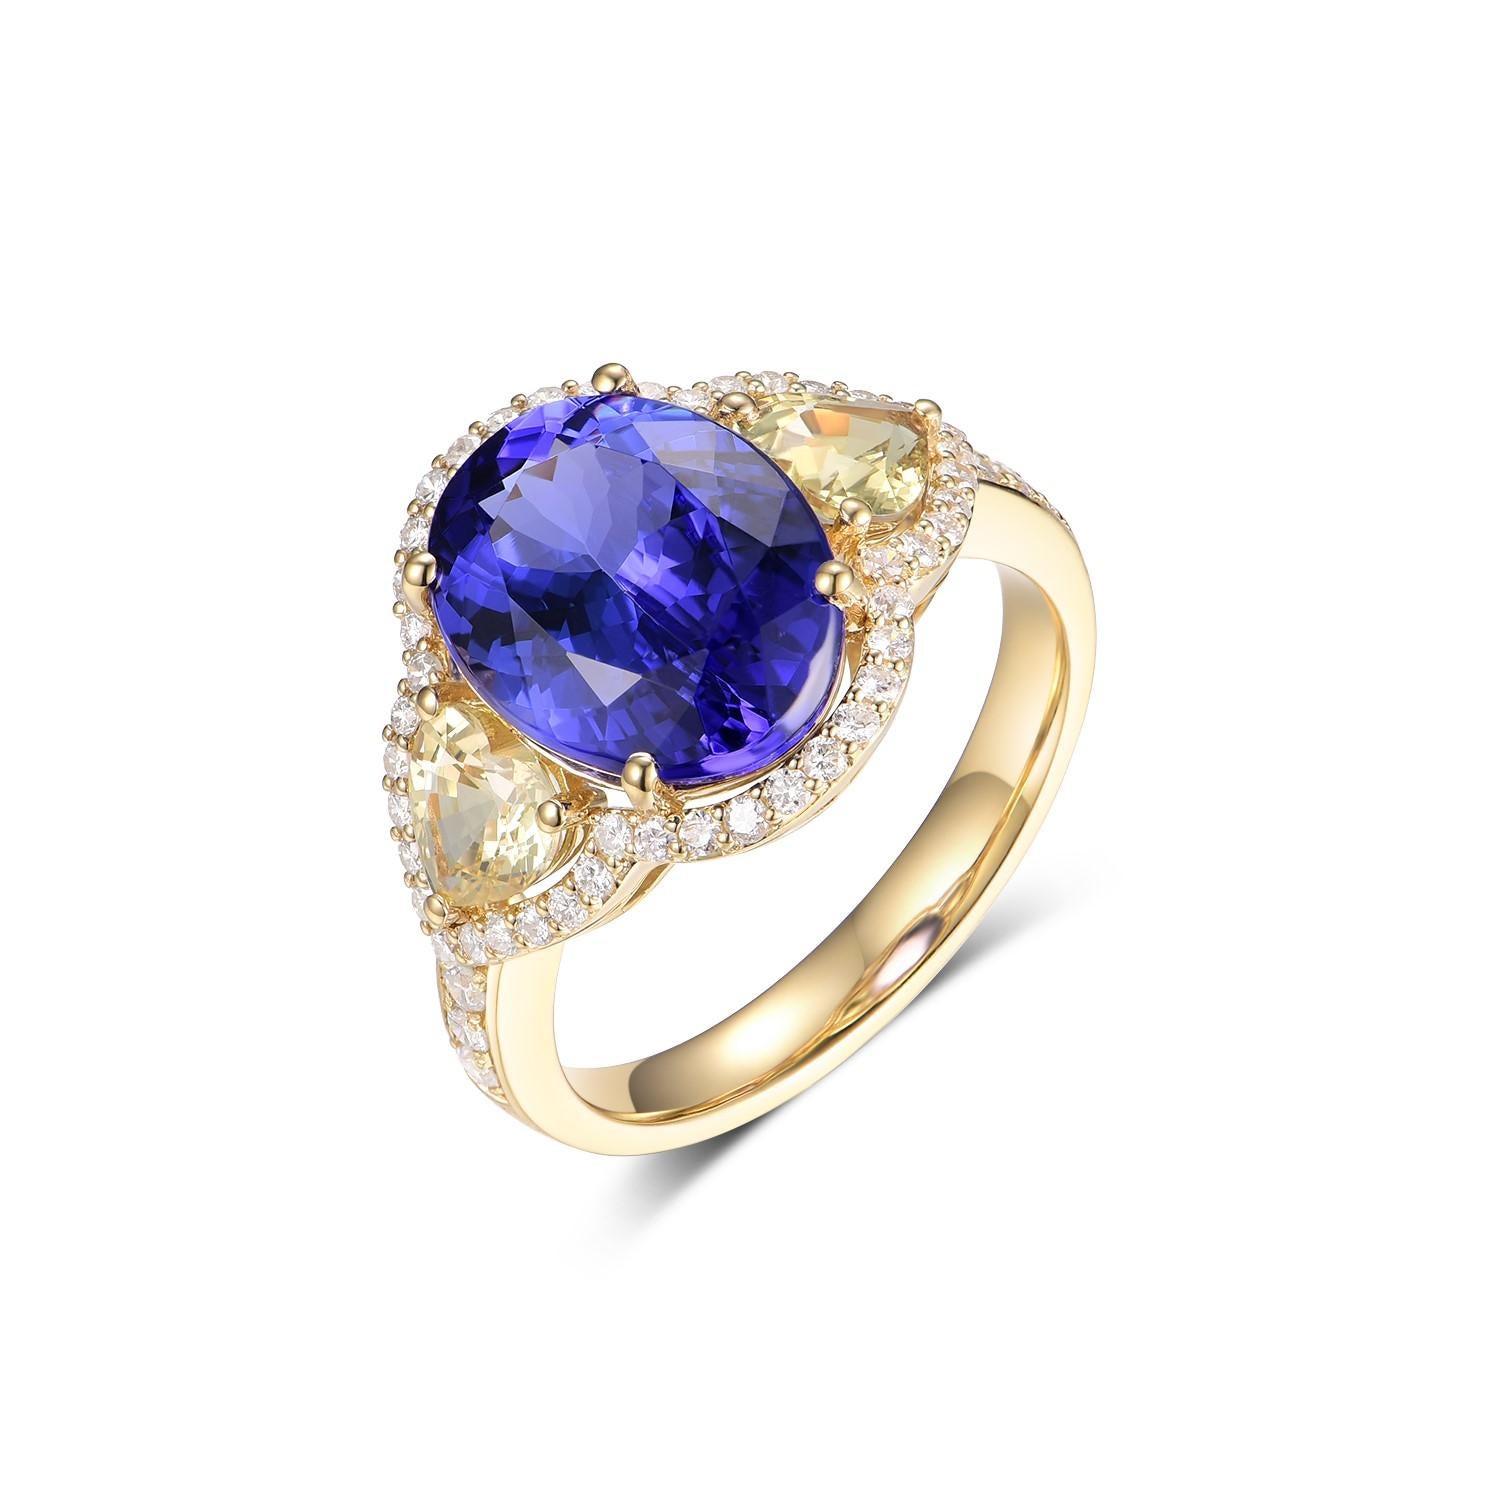 This ring is a stunning piece that centers around a mesmerizing tanzanite, weighing in at 4.26 carats. The tanzanite's deep blue-violet hue captivates with its rich saturation and brilliant sparkle, a testament to the gemstone's prized qualities.